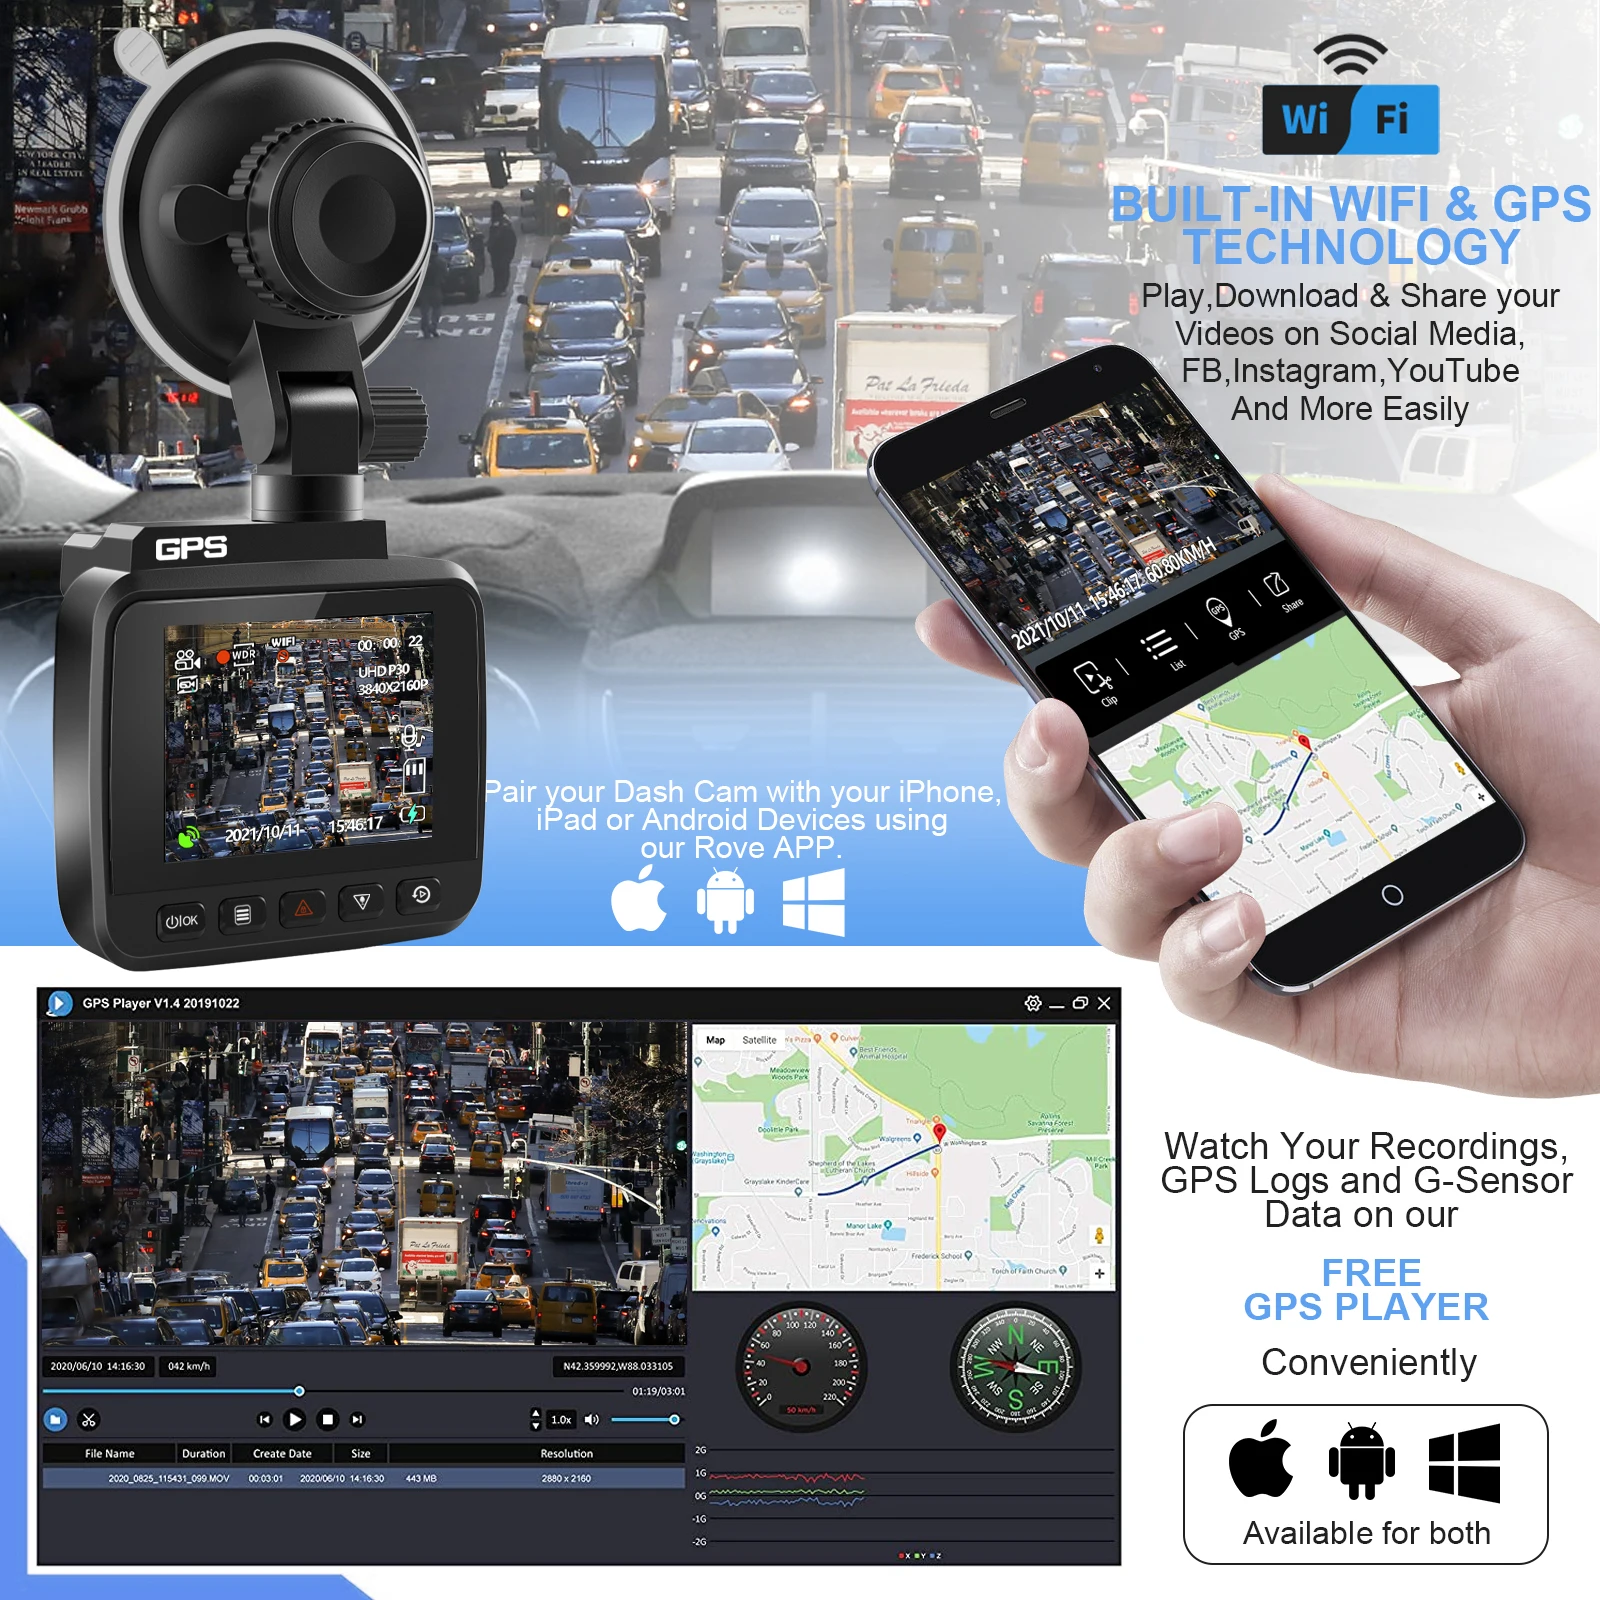 ROVE Dash Cam on X: Get a 4k dash cam with a built-in WiFi feature --  allows you to connect the dash camera to your smartphone to view, download  and share your